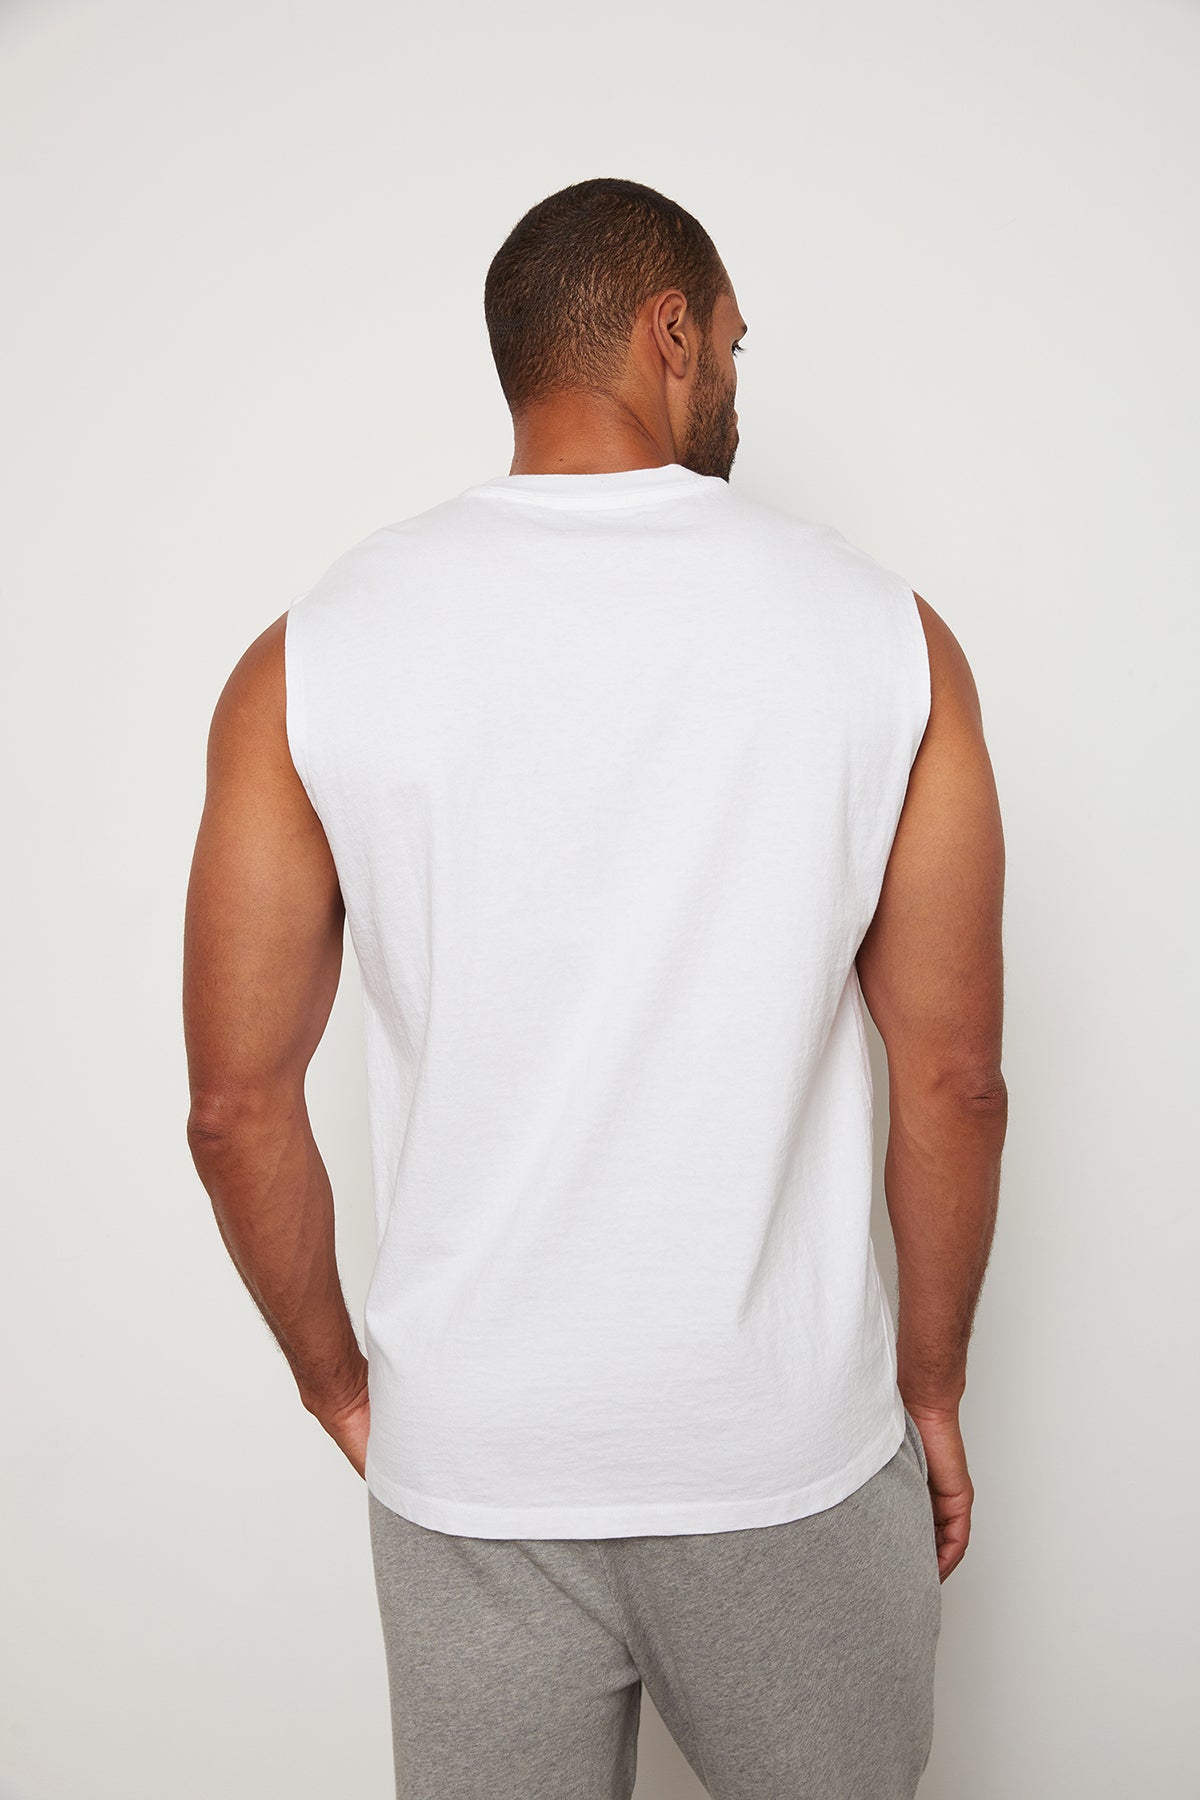 Bodhi Crew Neck Muscle Tee in White Back-24705625161921